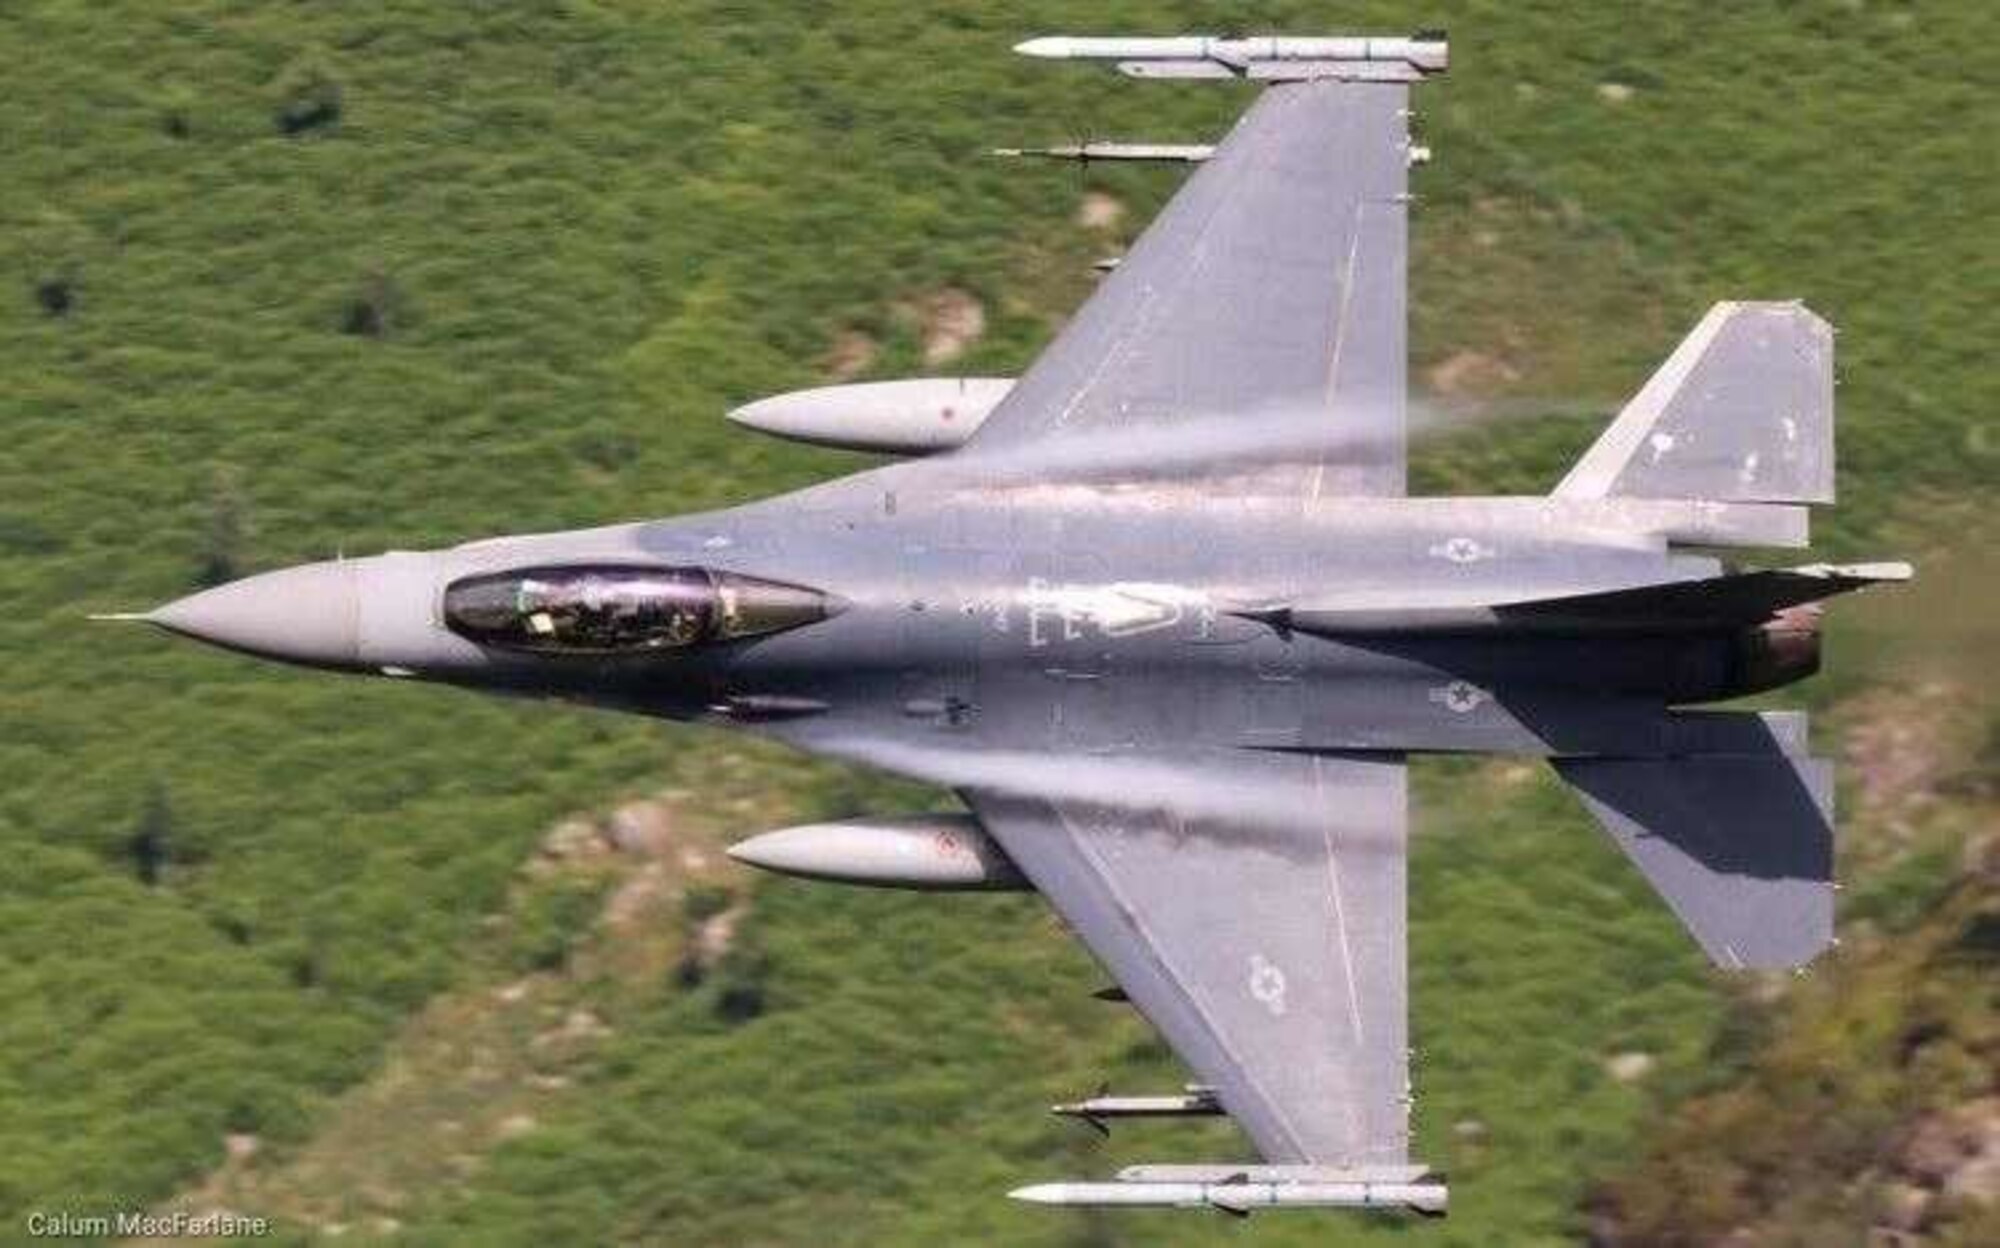 A U.S. Air Force F-16 Fighting Falcon assigned to the 31st Fighter Wing participates in a live fire air-to-air missile training employment event in northwestern Wales, July, 2021. The 31st FW F-16s had the opportunity to integrate with F-15E and F-15Cs assigned to Royal Air Force Lakenheath and execute low-level flight training within the United Kingdom environment. (Courtesy photo)